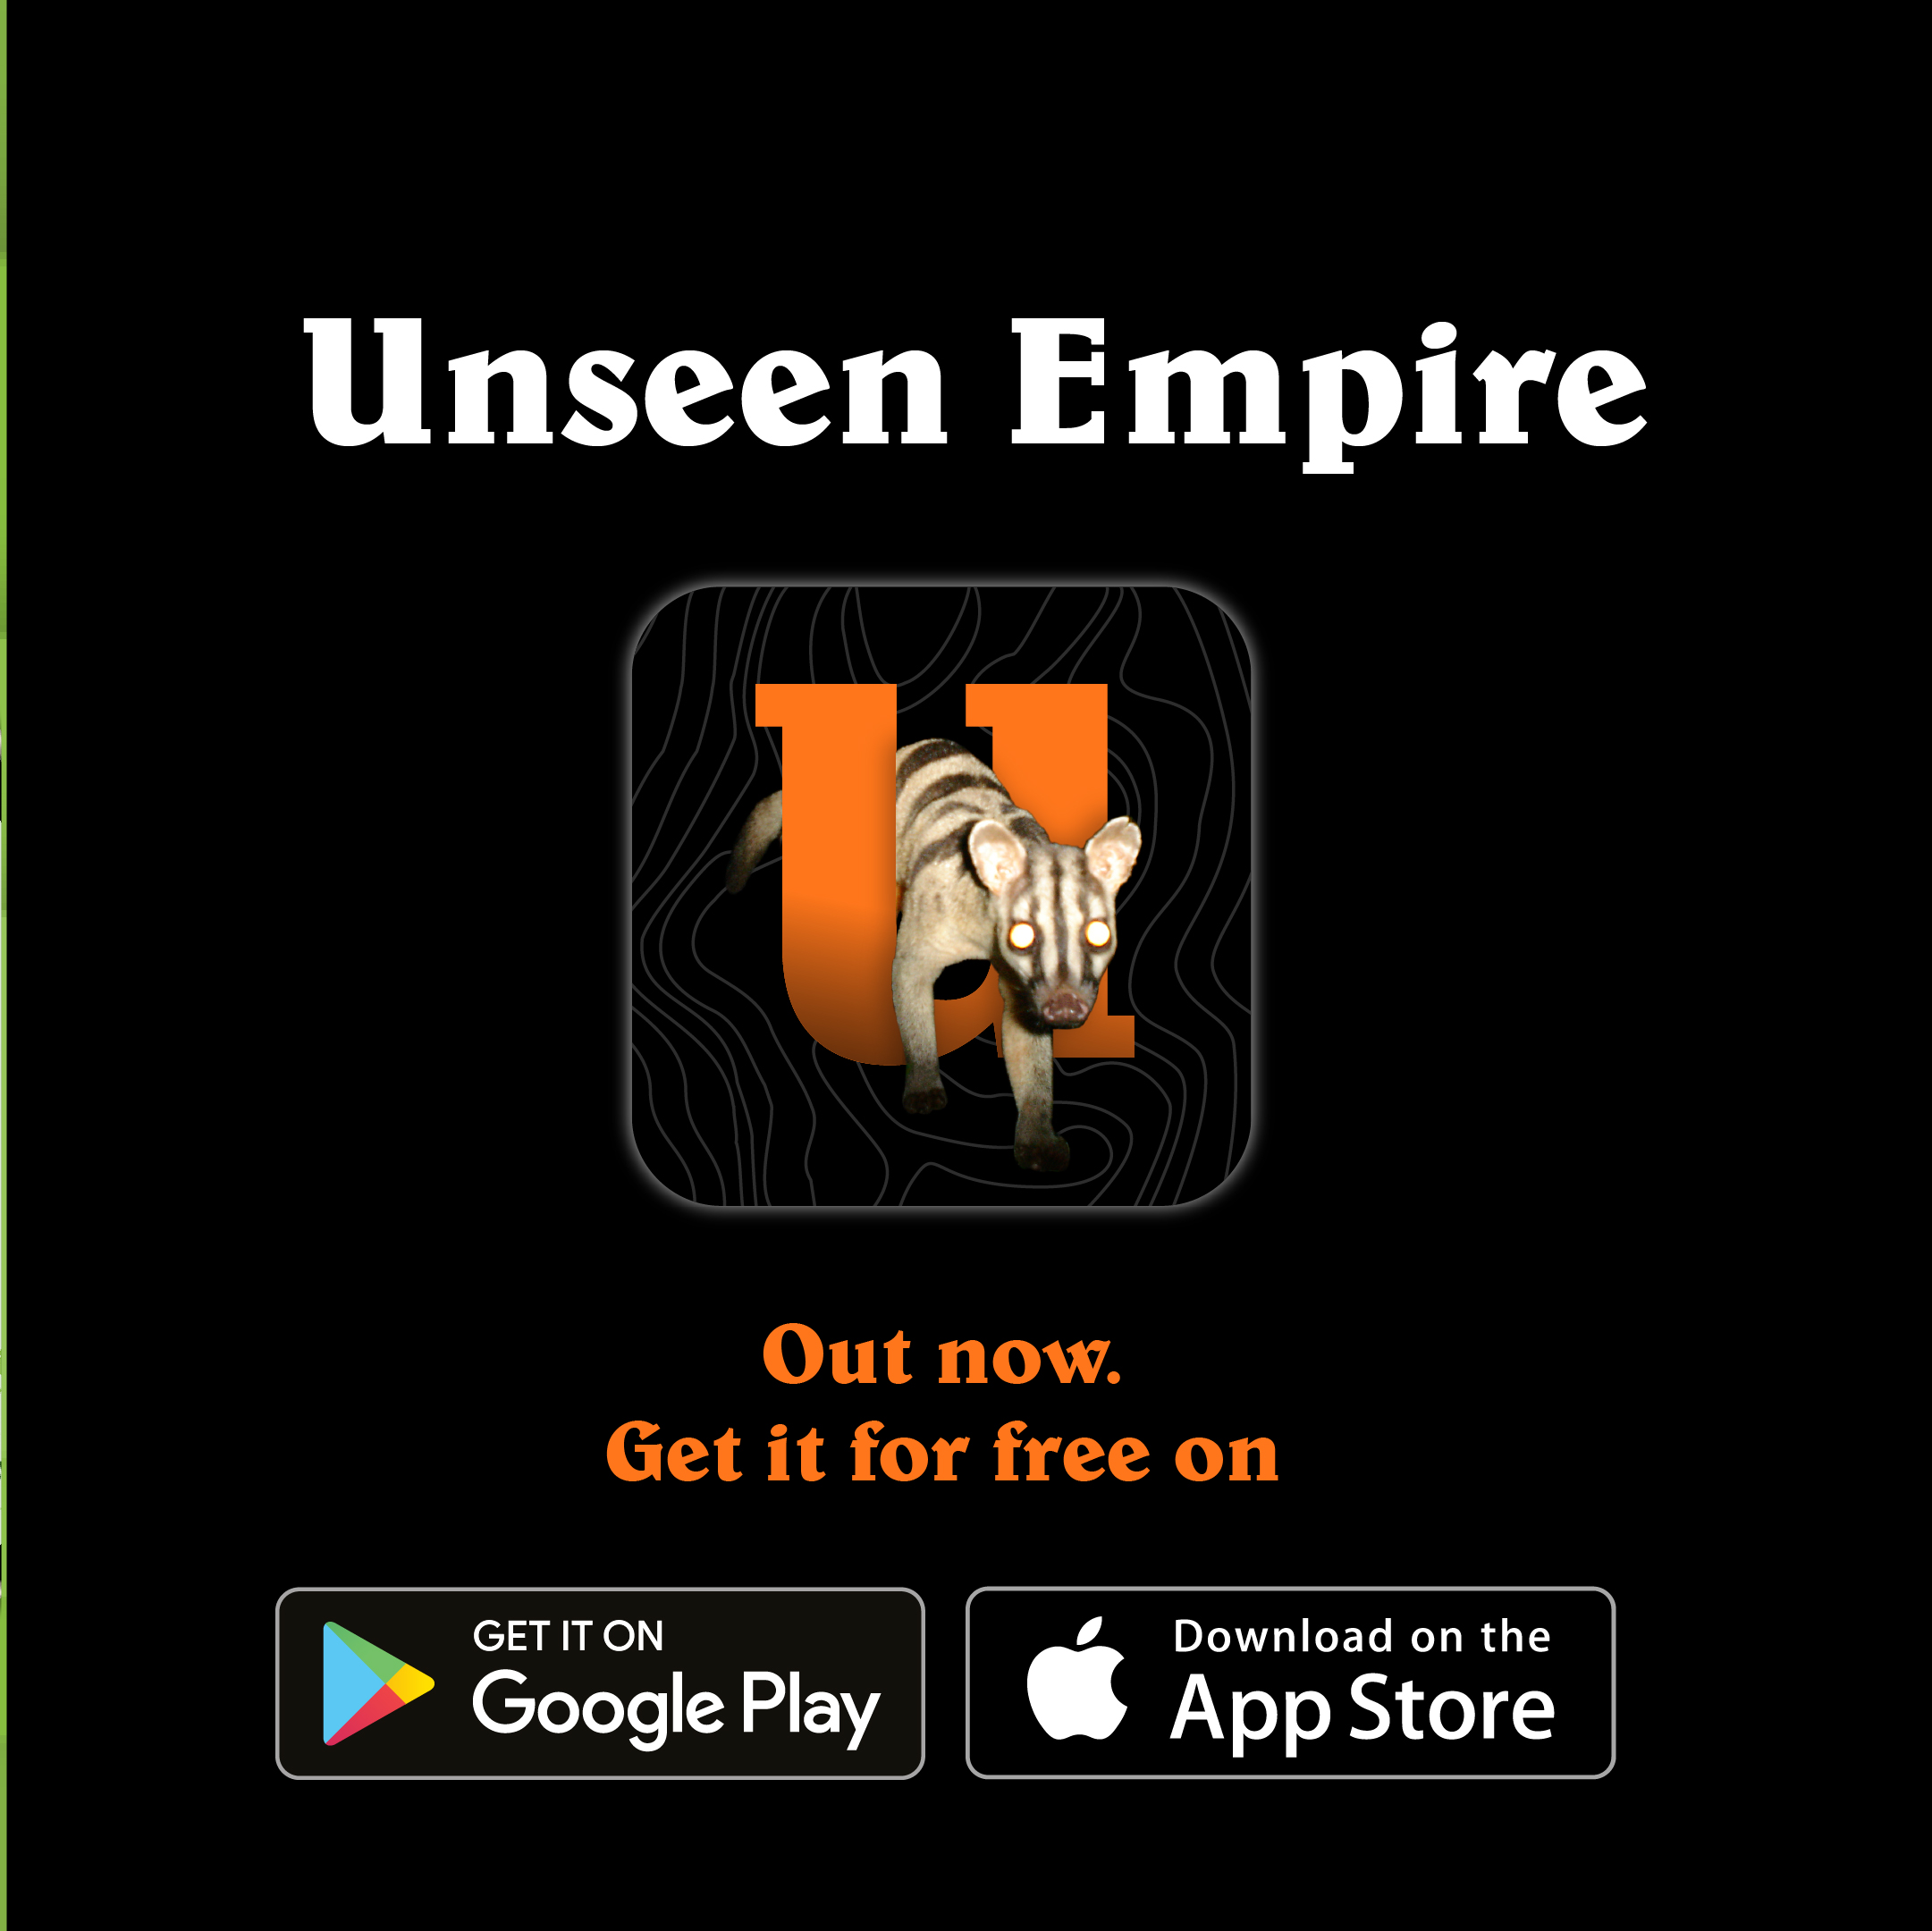 Poster for WildCRU's Unseen Empire